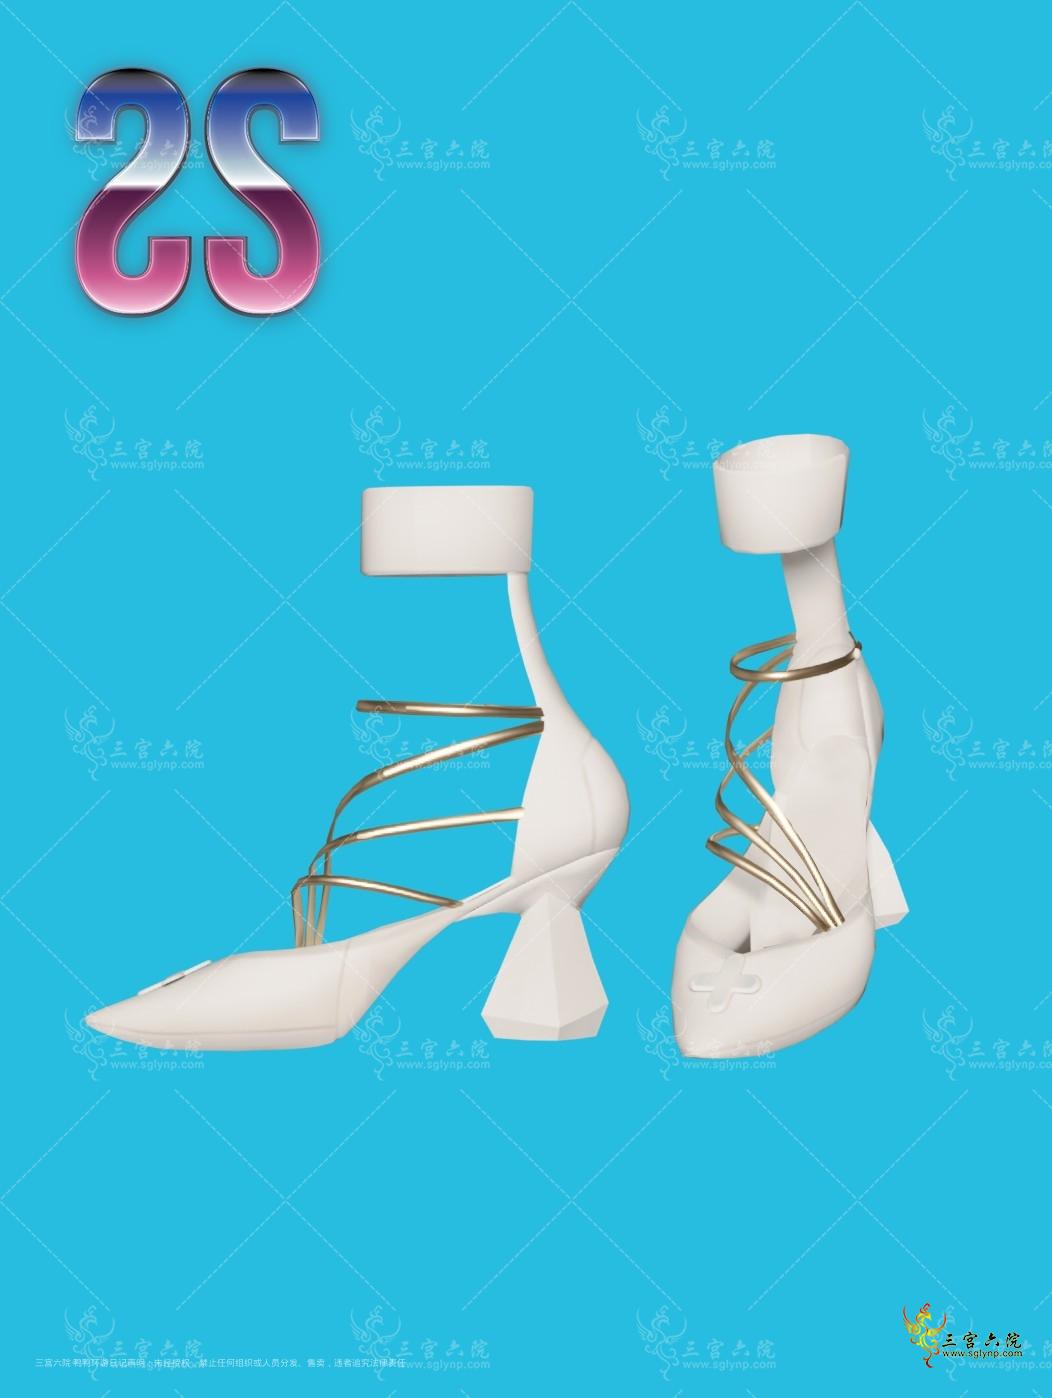 PAB shoes preview.png